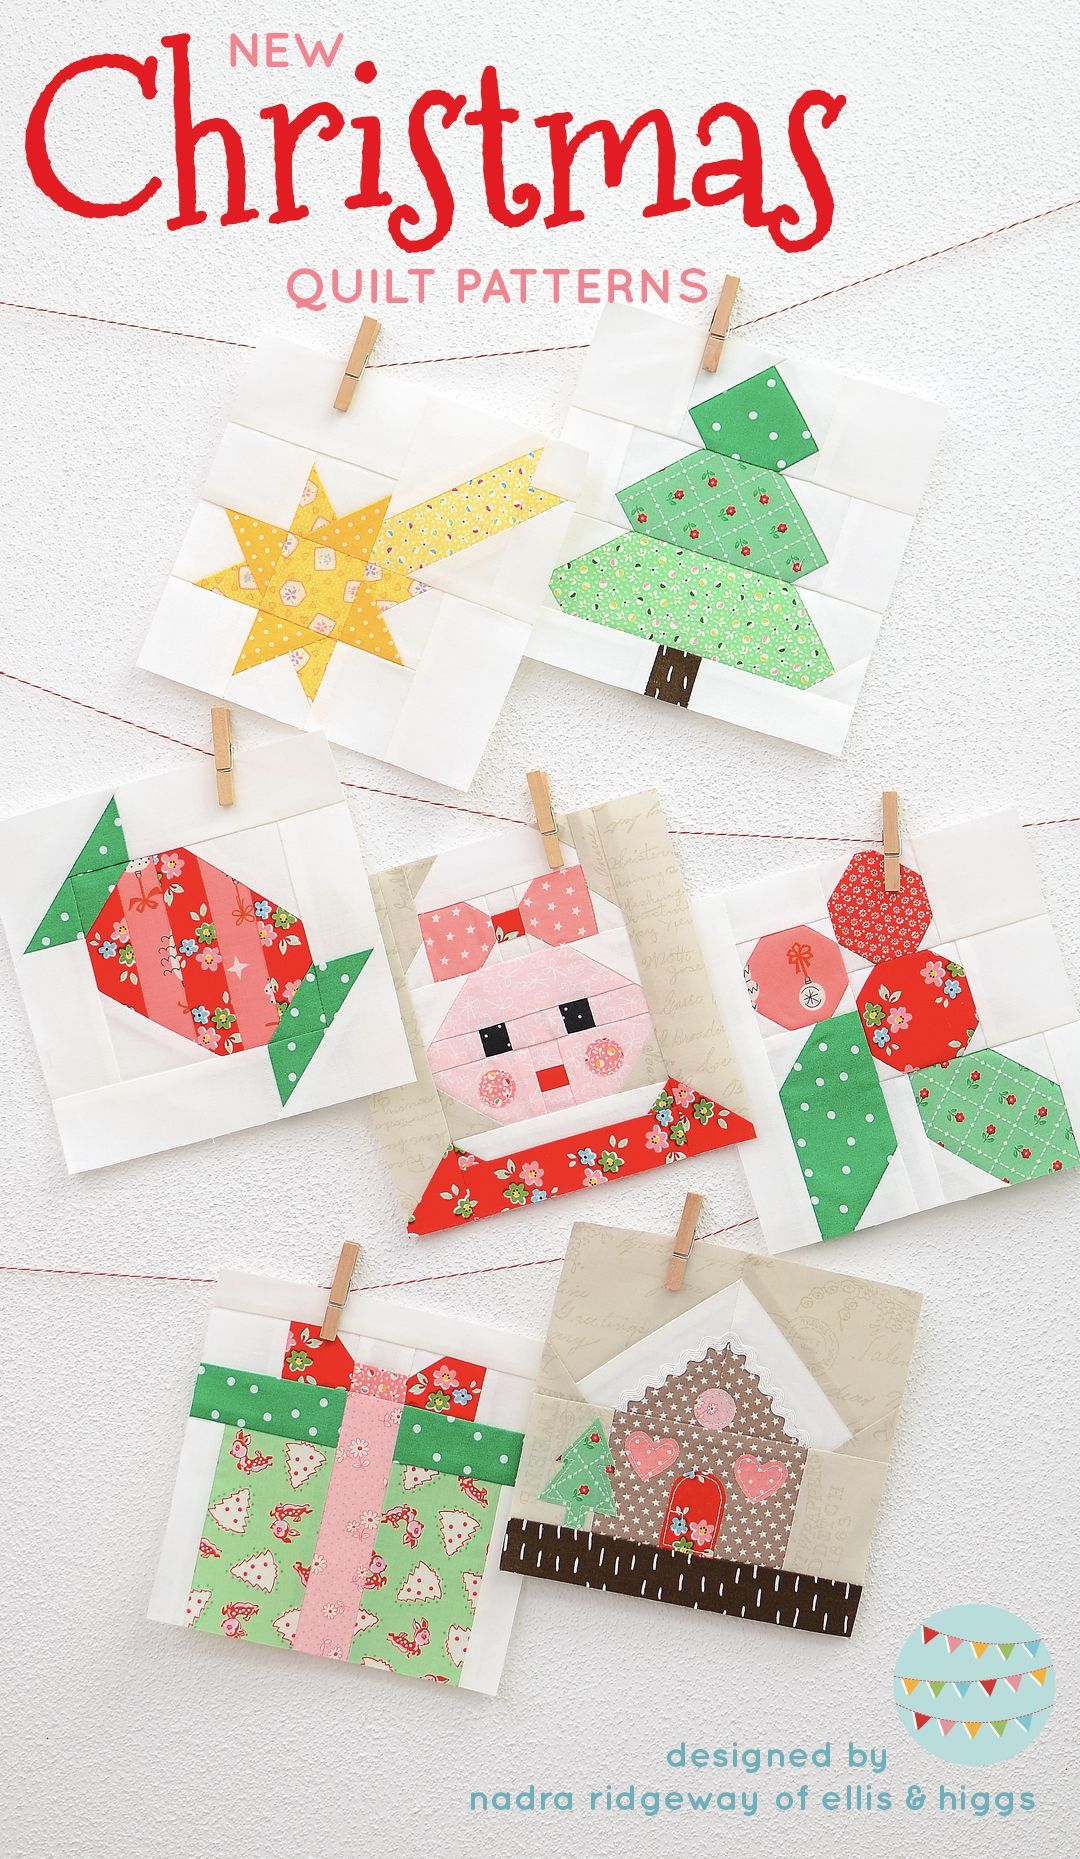 New Christmas Quilt Patterns: Gingerbread House Quilt Pattern {+ free Mini Quilt Tutorial} - ellis & higgs -   14 fabric crafts Christmas quilt blocks ideas